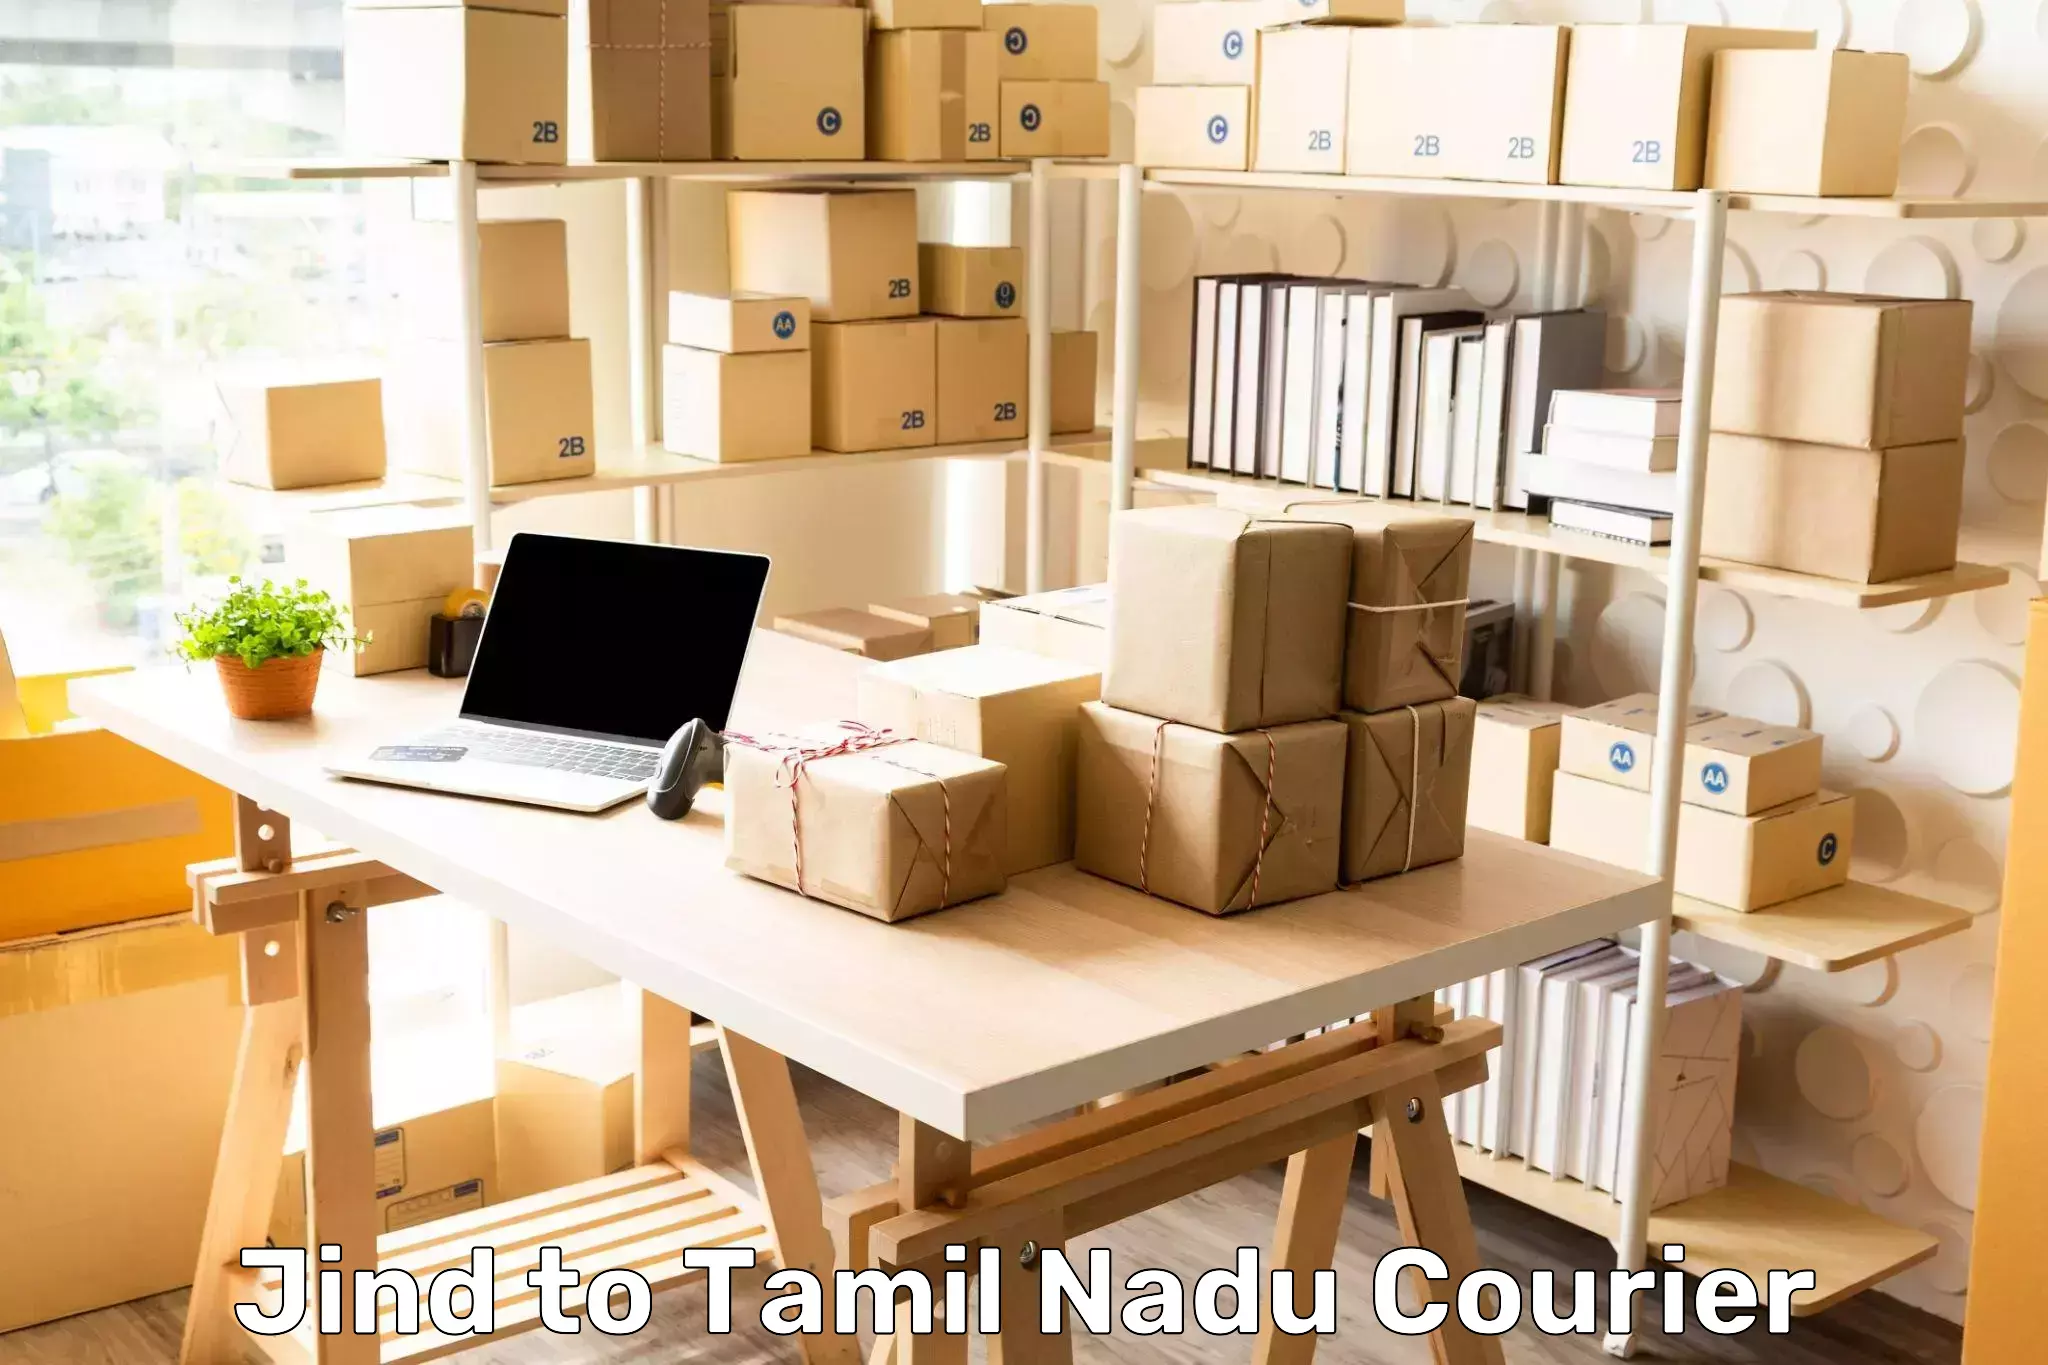 Multi-carrier shipping Jind to Tamil Nadu